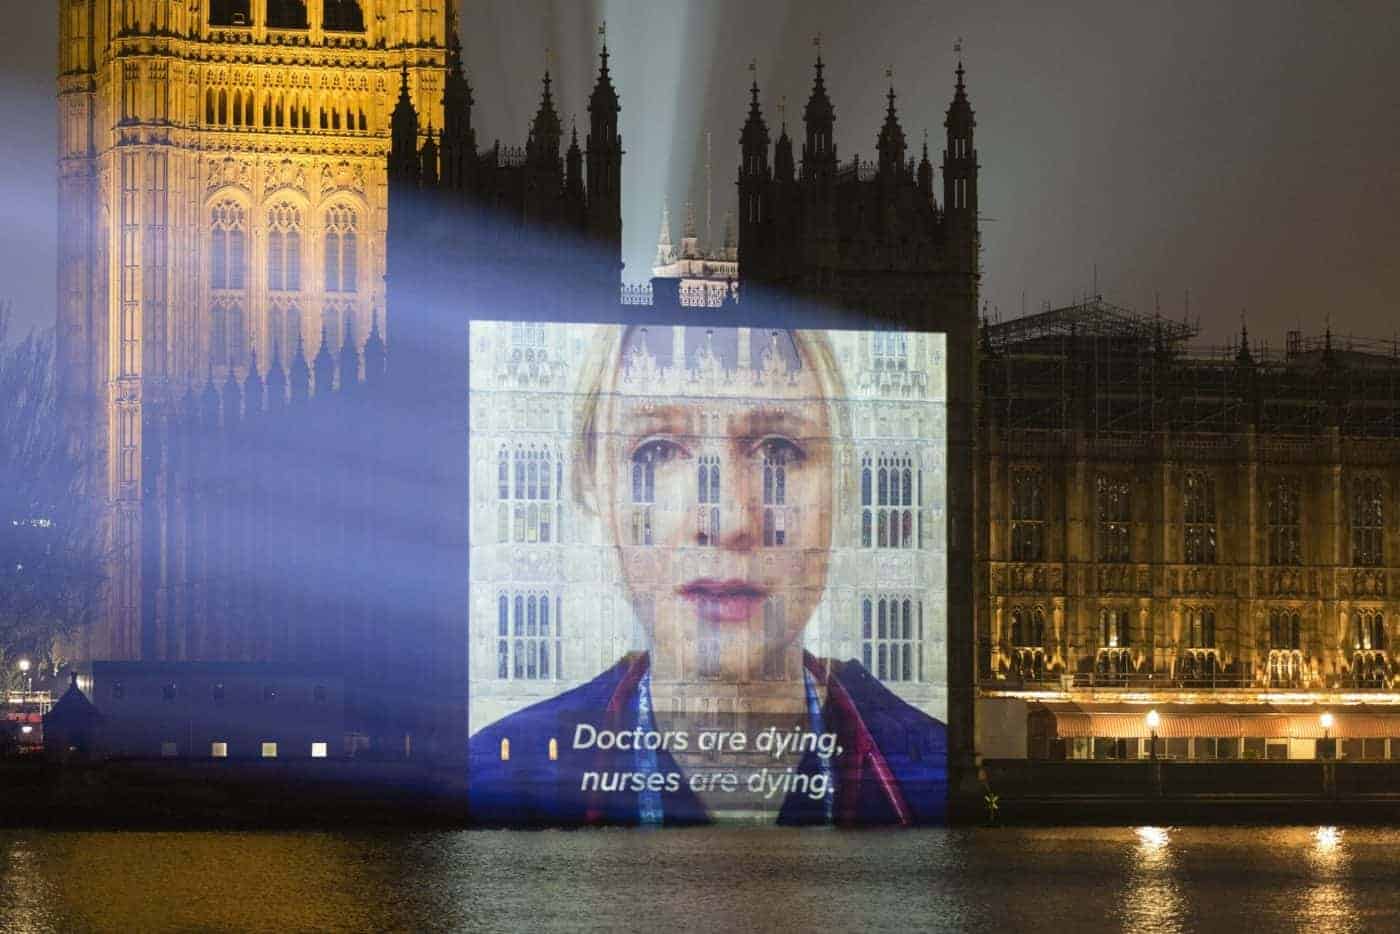 NHS staff plea for PPE in video projected onto Palace of Westminster